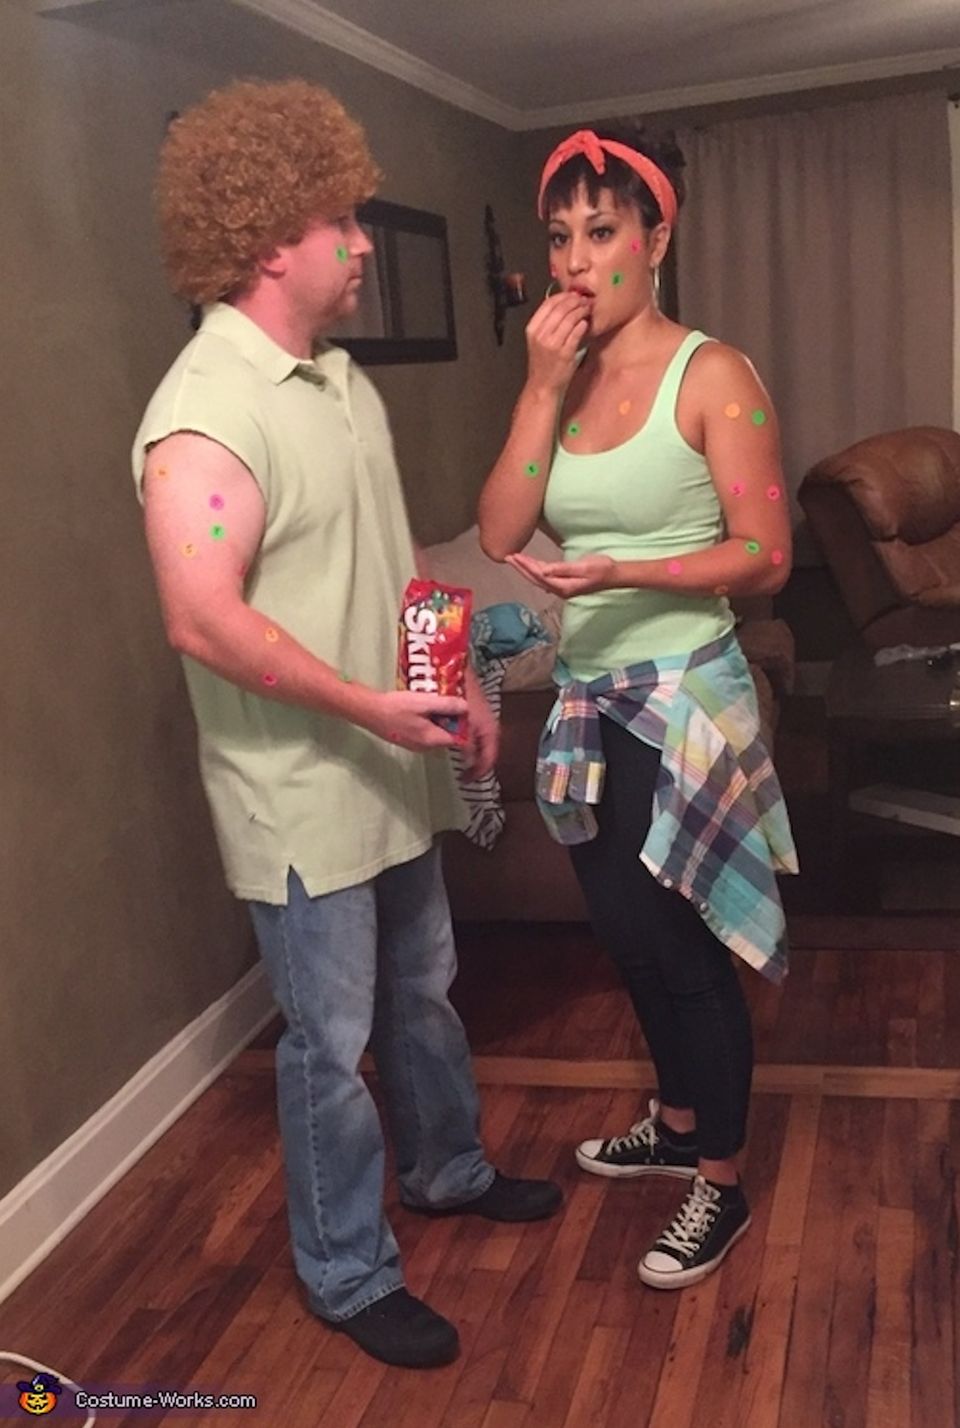 Diy Last Minute Halloween Costumes For Couples That Are Actually